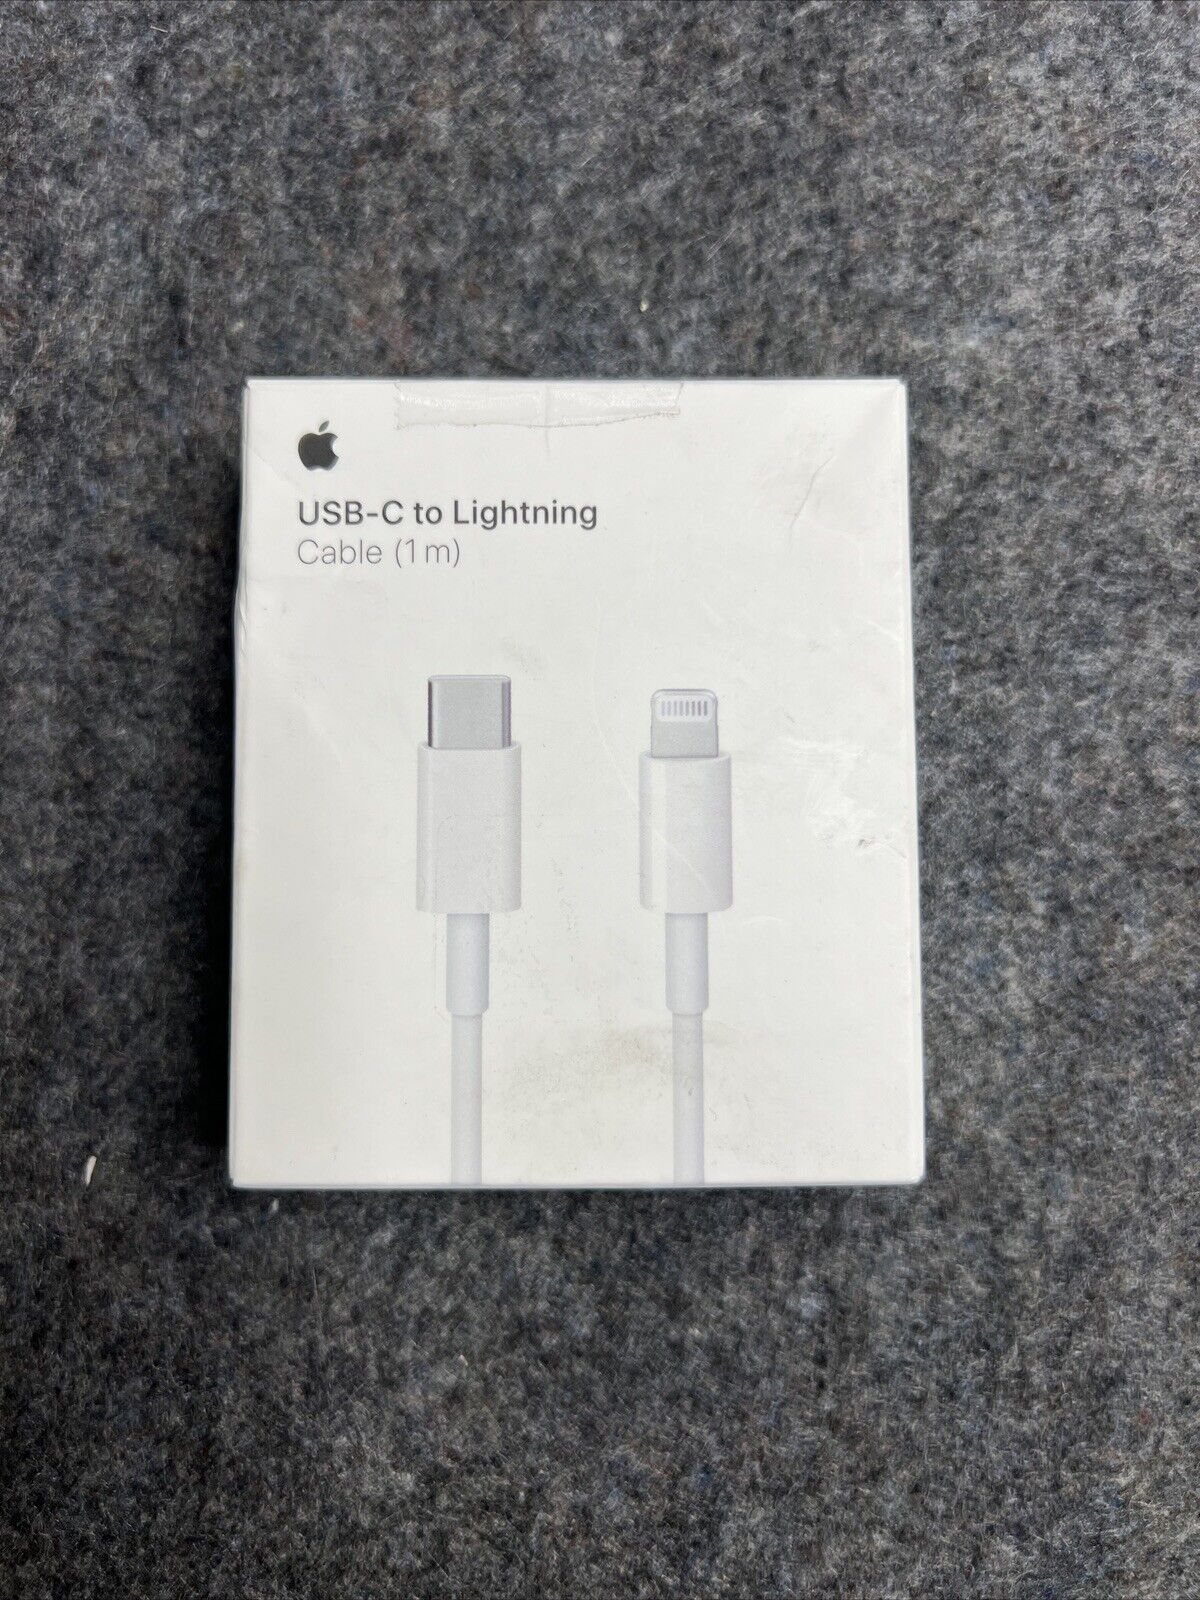 Genuine Apple USB-C to Lightning Cable - Brand New in box iPhone/iPad cord